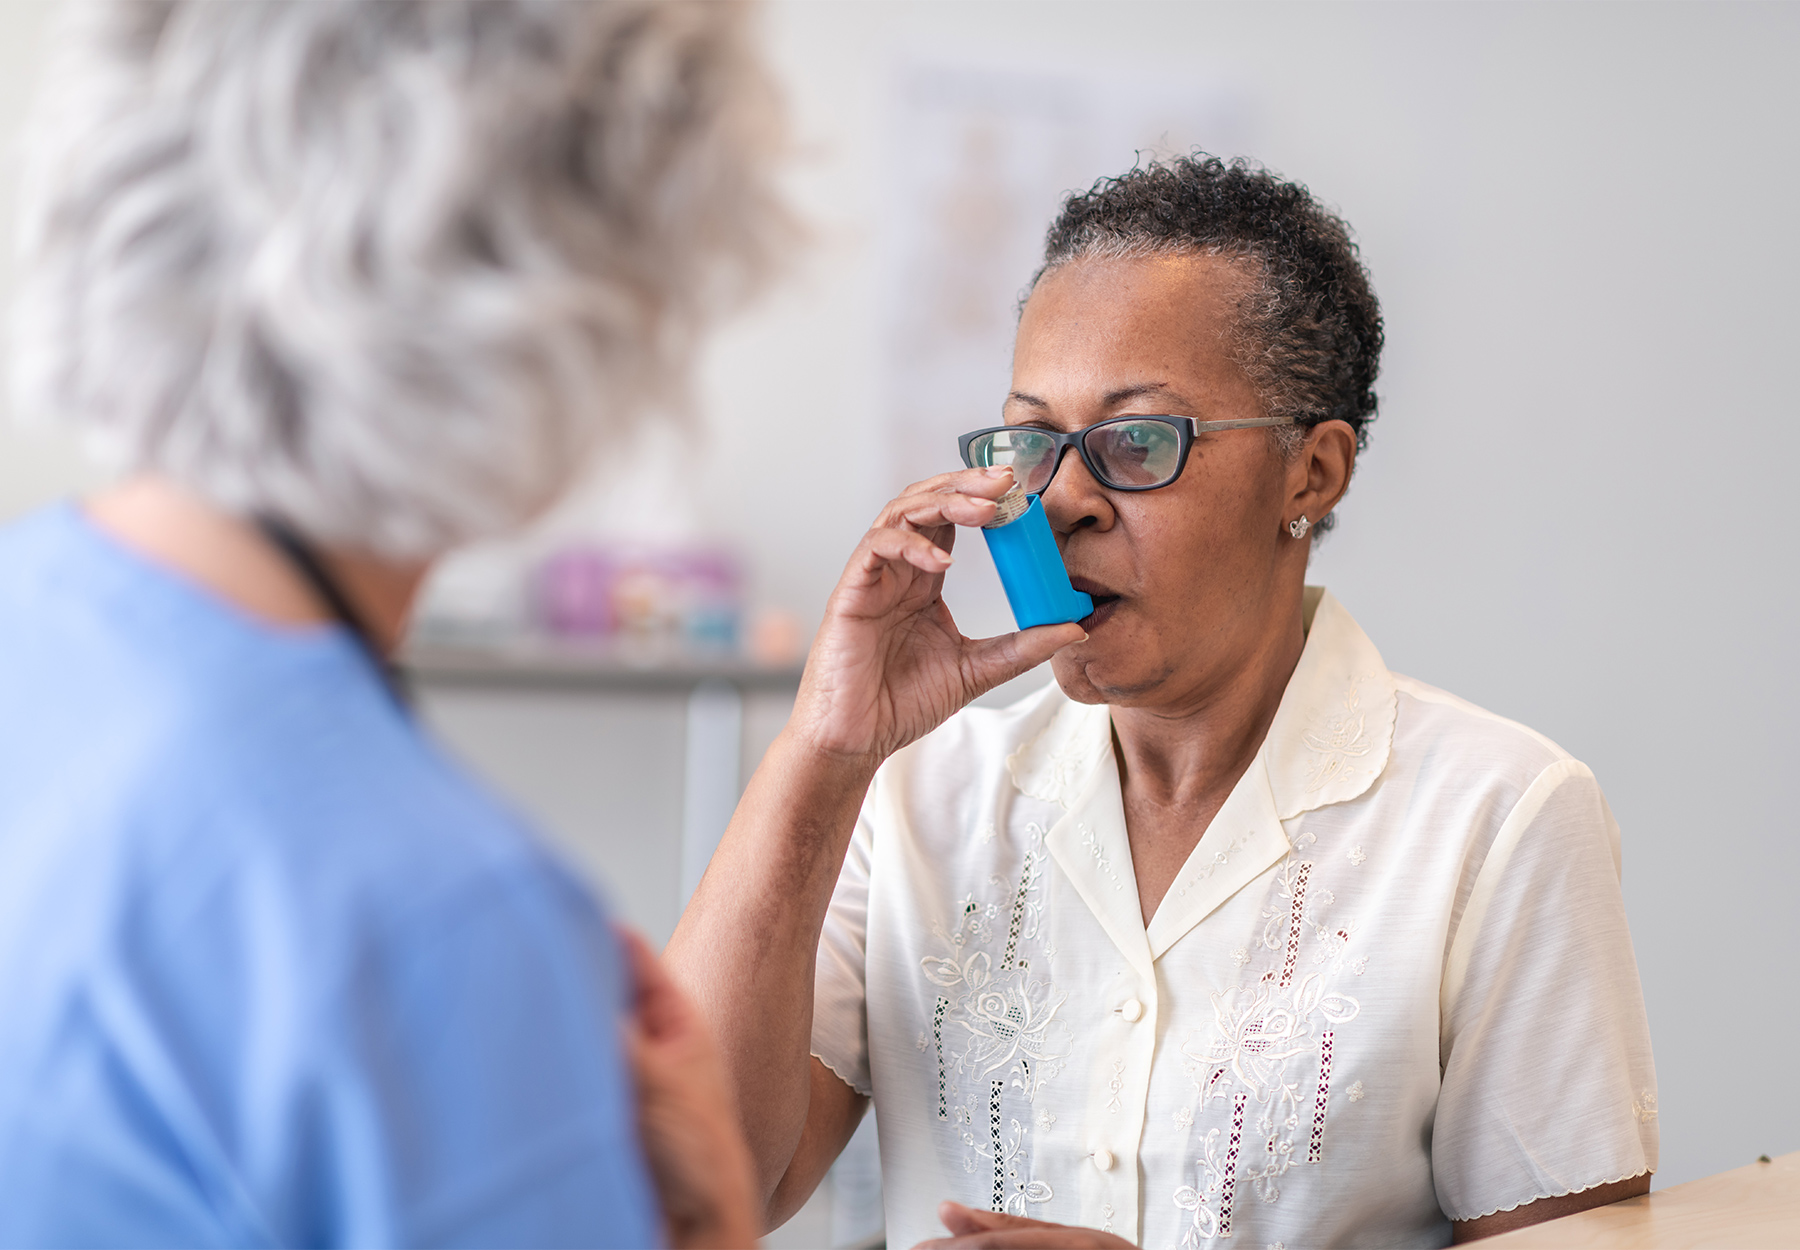 An elderly black woman uses an inhaler as her health care provider looks on.